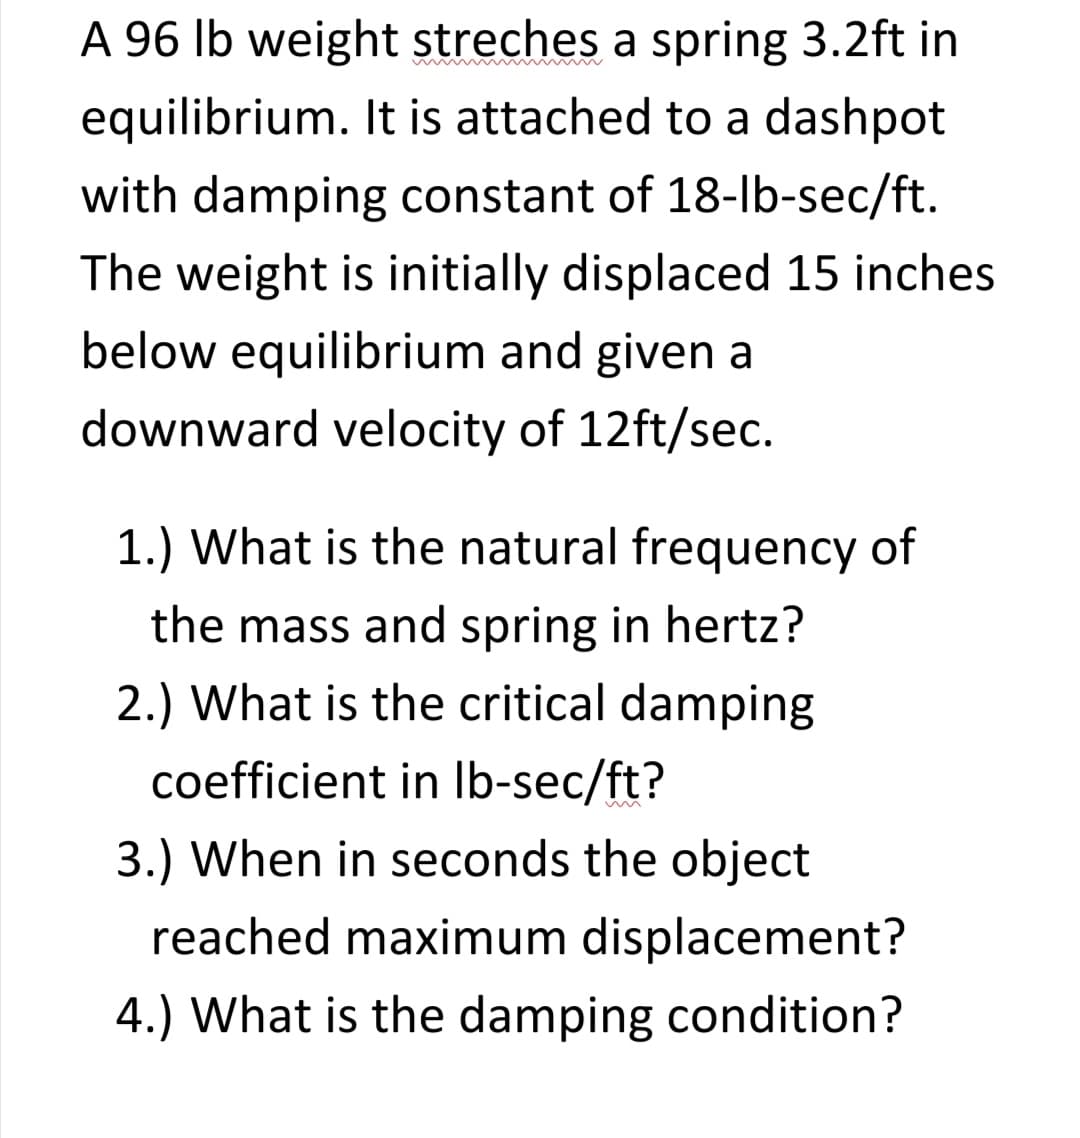 A 96 lb weight streches a spring 3.2ft in
equilibrium. It is attached to a dashpot
with damping constant of 18-lb-sec/ft.
The weight is initially displaced 15 inches
below equilibrium and given a
downward velocity of 12ft/sec.
1.) What is the natural frequency of
the mass and spring in hertz?
2.) What is the critical damping
coefficient in Ib-sec/ft?
3.) When in seconds the object
reached maximum displacement?
4.) What is the damping condition?
